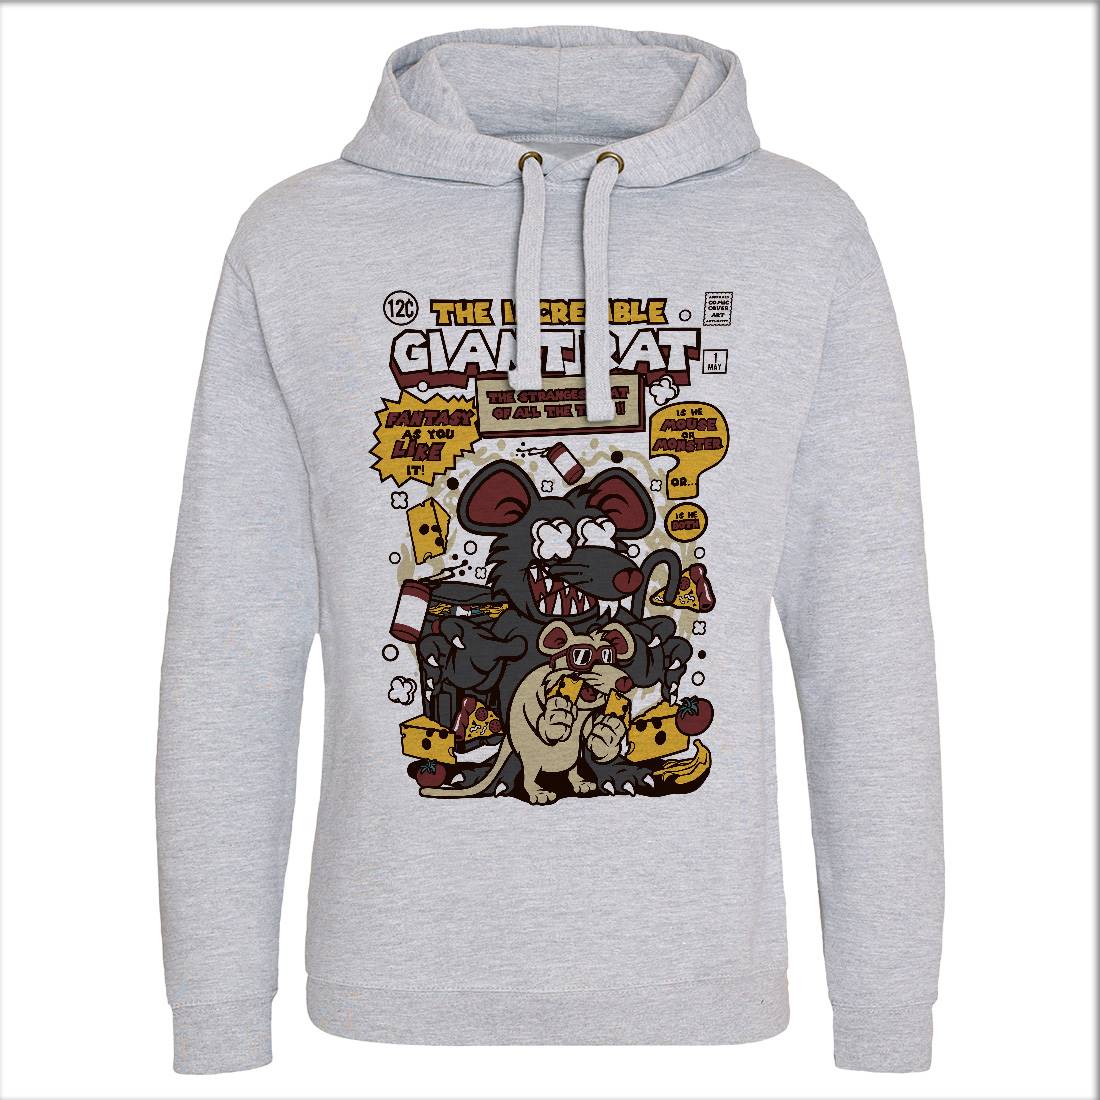 The Incredible Giant Rat Mens Hoodie Without Pocket Animals C676